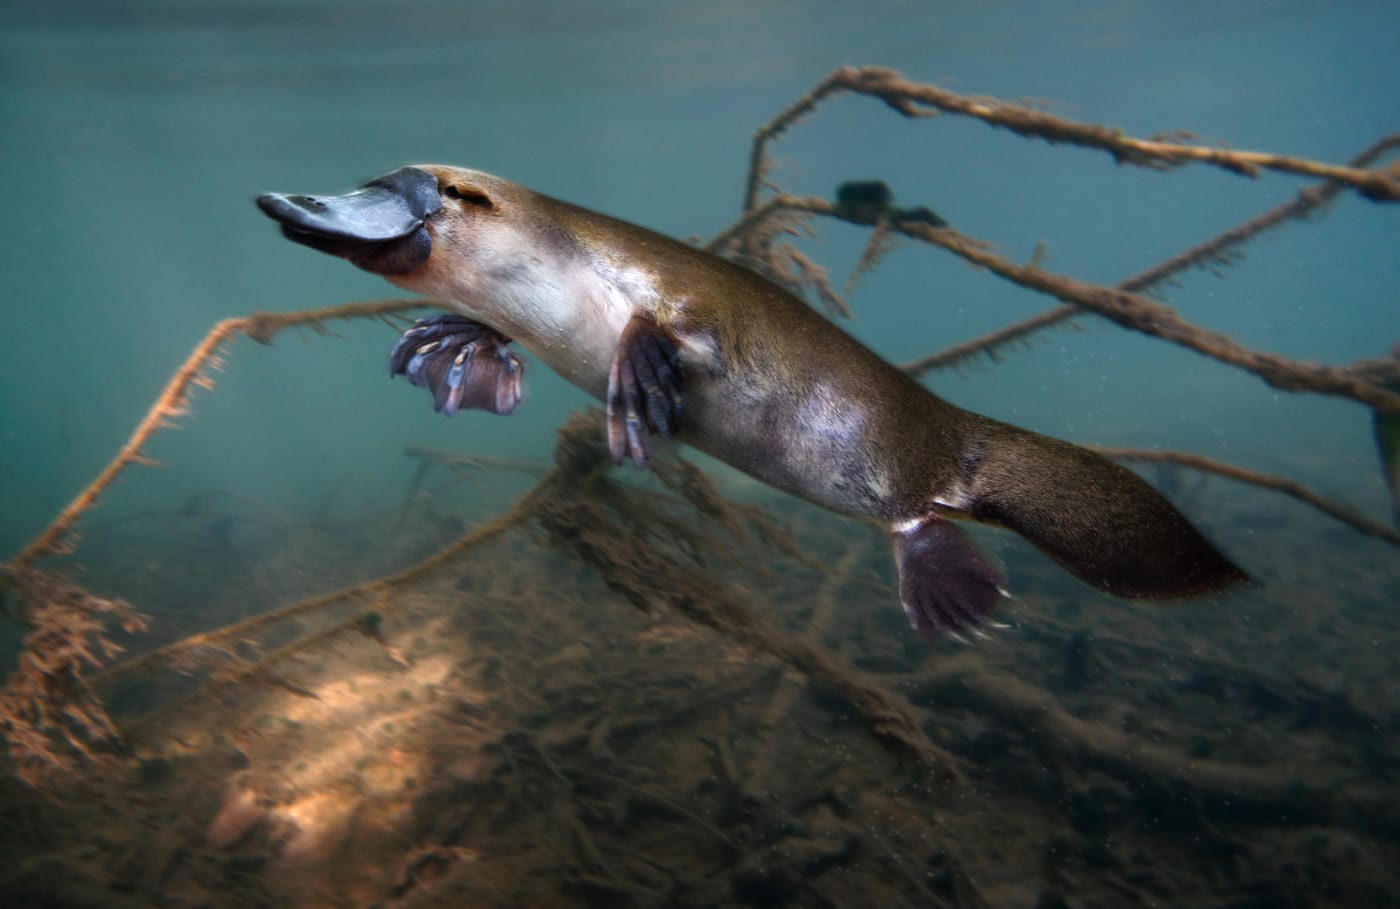 Platypus or Duck-billed platypus, Ornithorhynchus anatinus, swimming underwater in a river.